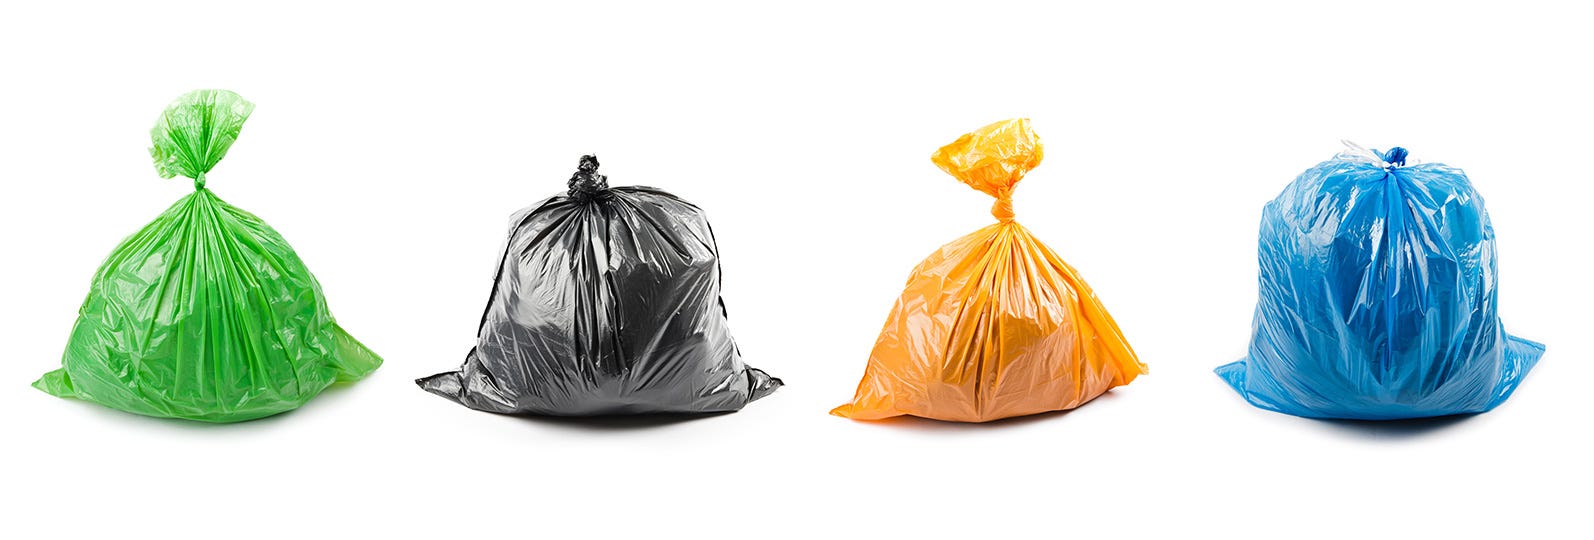 Trash Bags and Liners